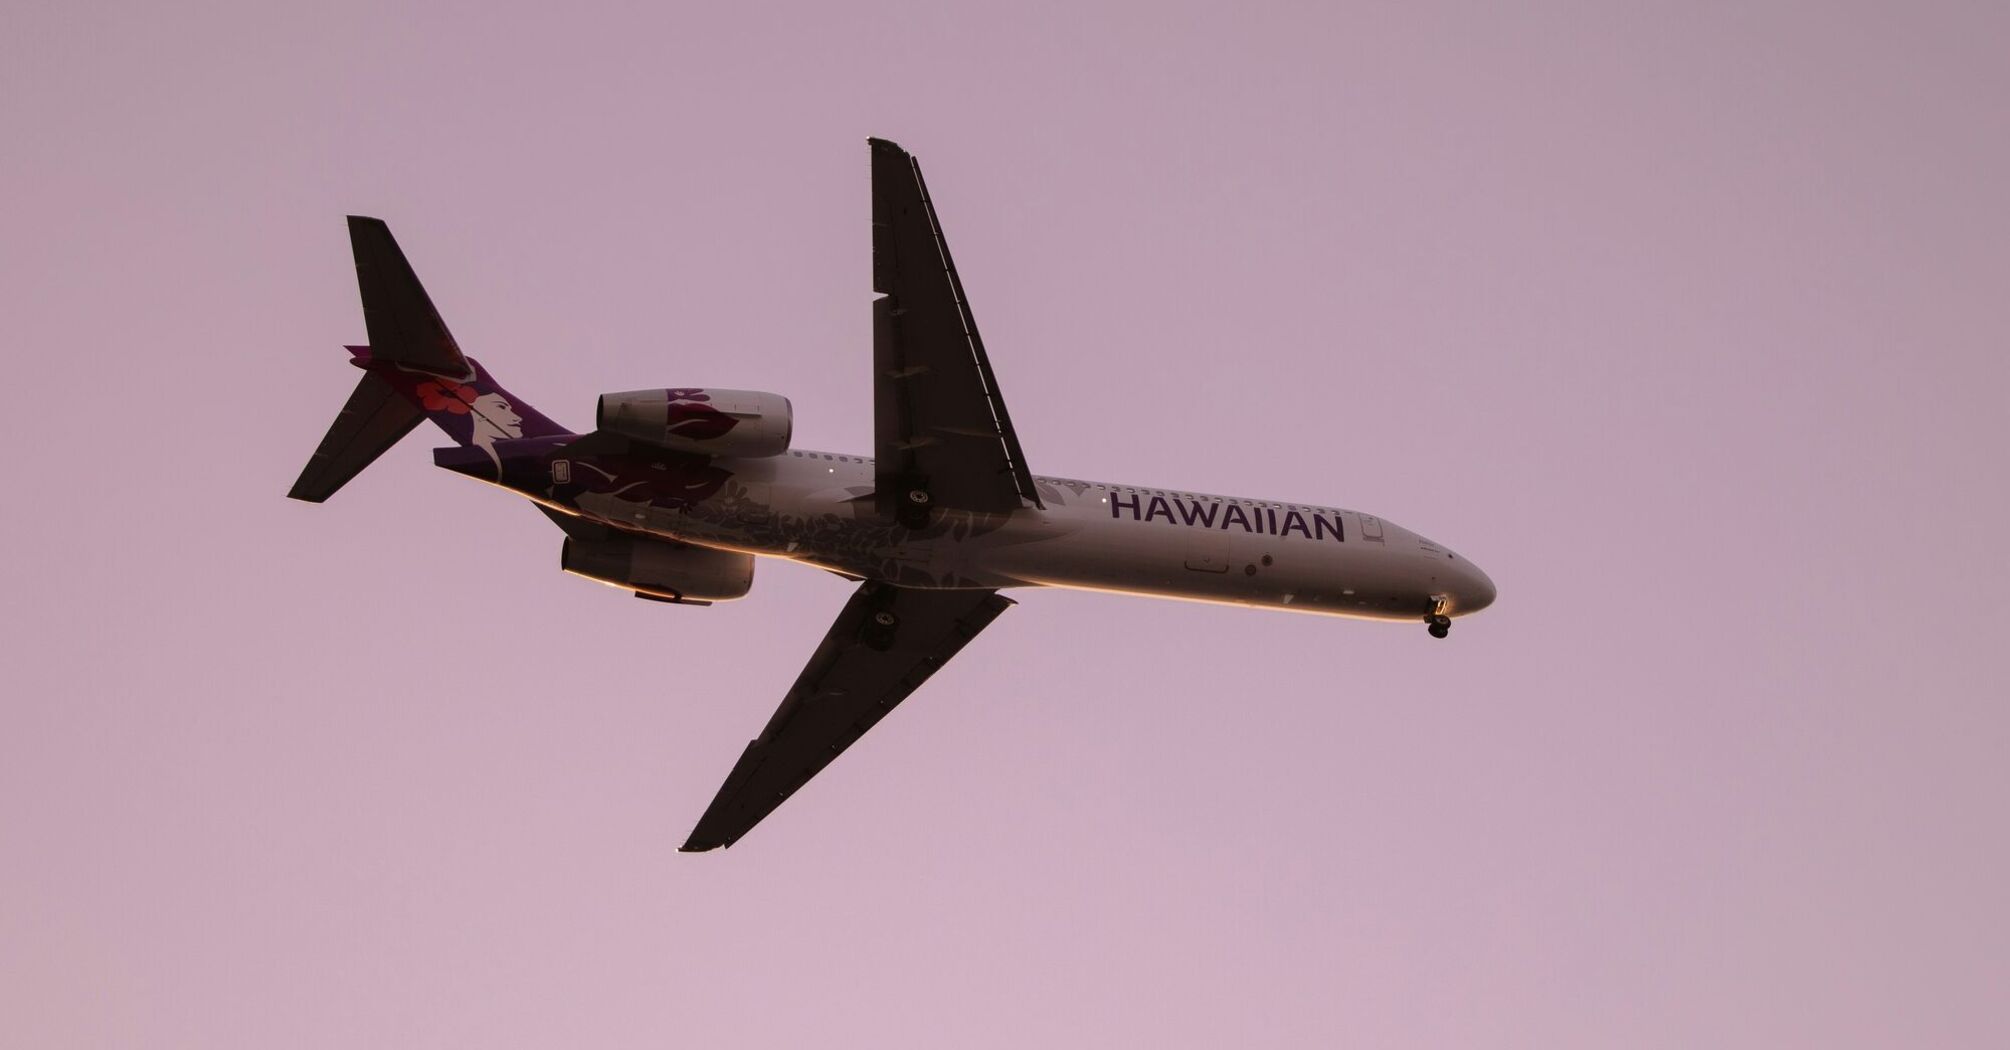 A Hawaiian Airlines aircraft in flight against a pink sky backdrop